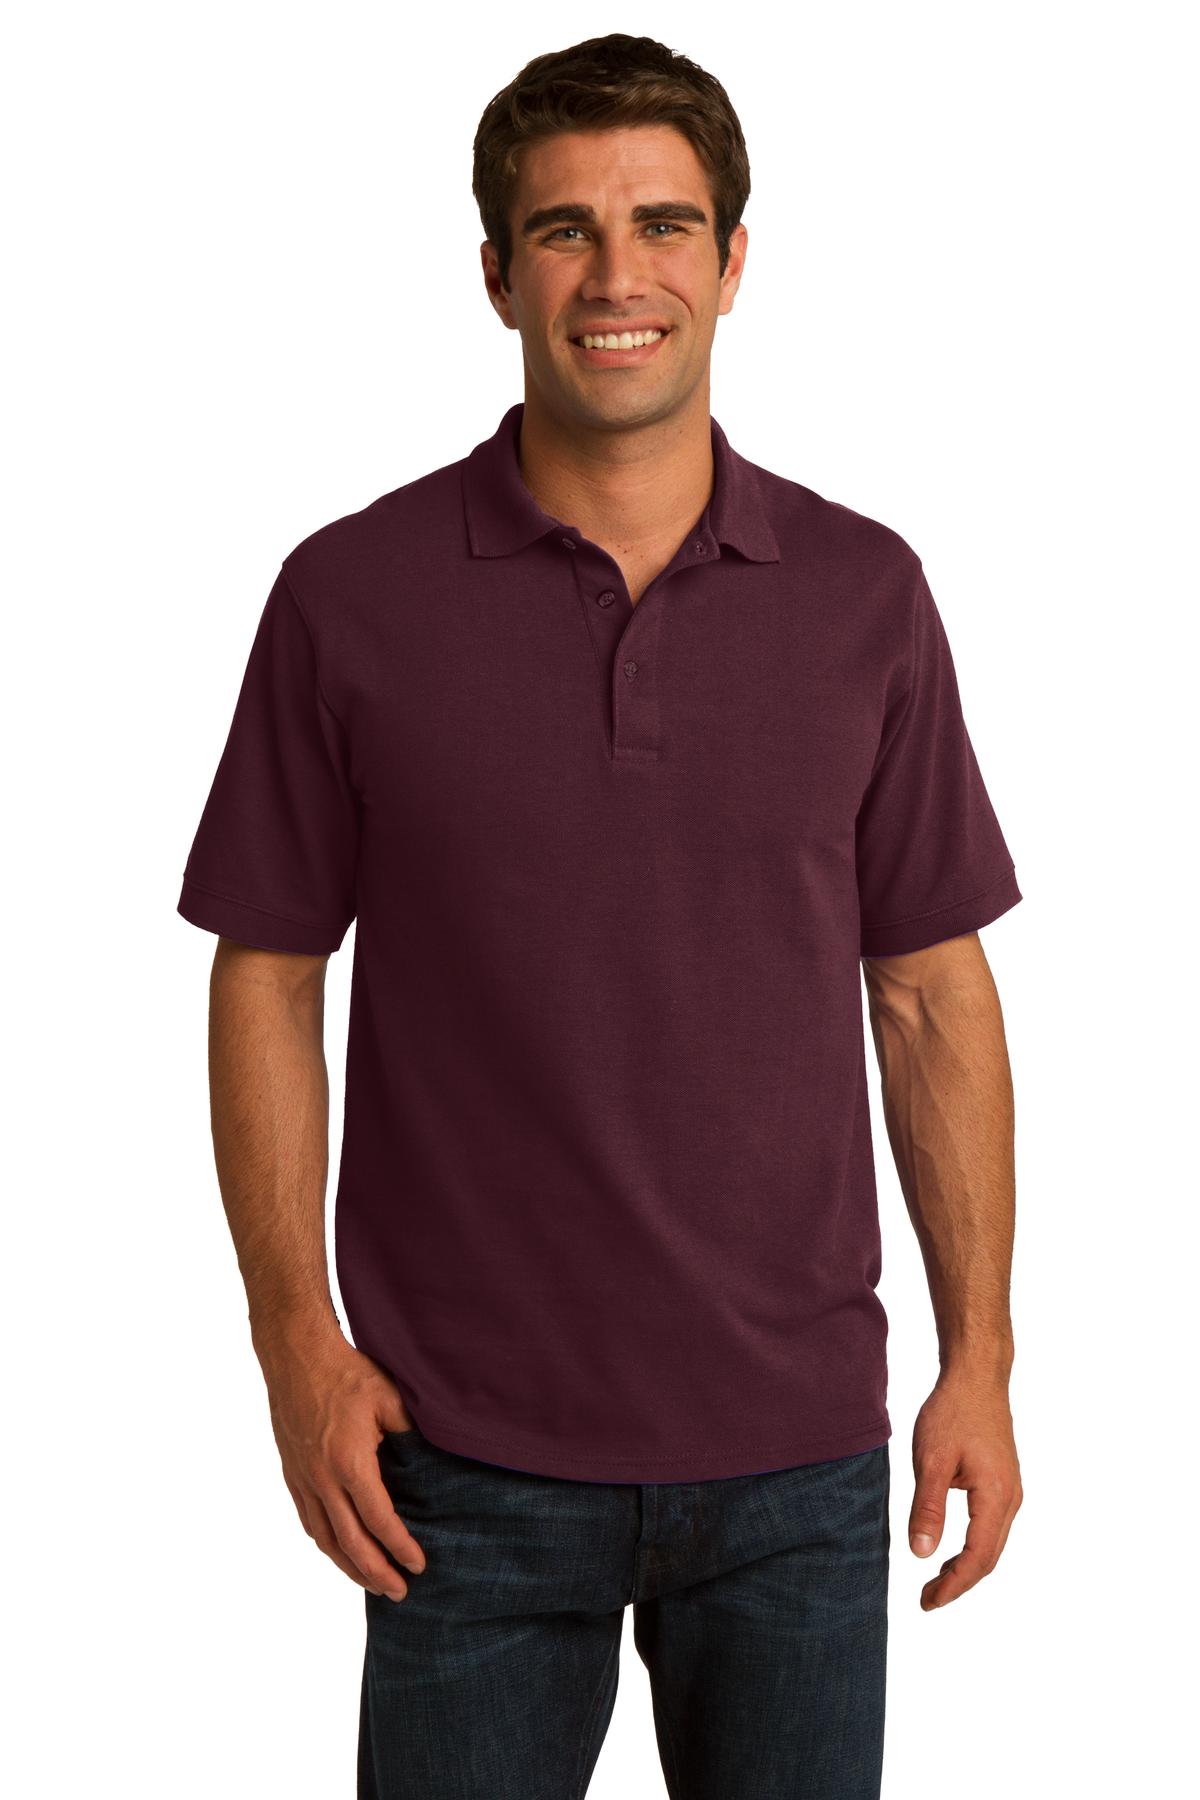 Port and Company Core Blend Pique Polo. KP155